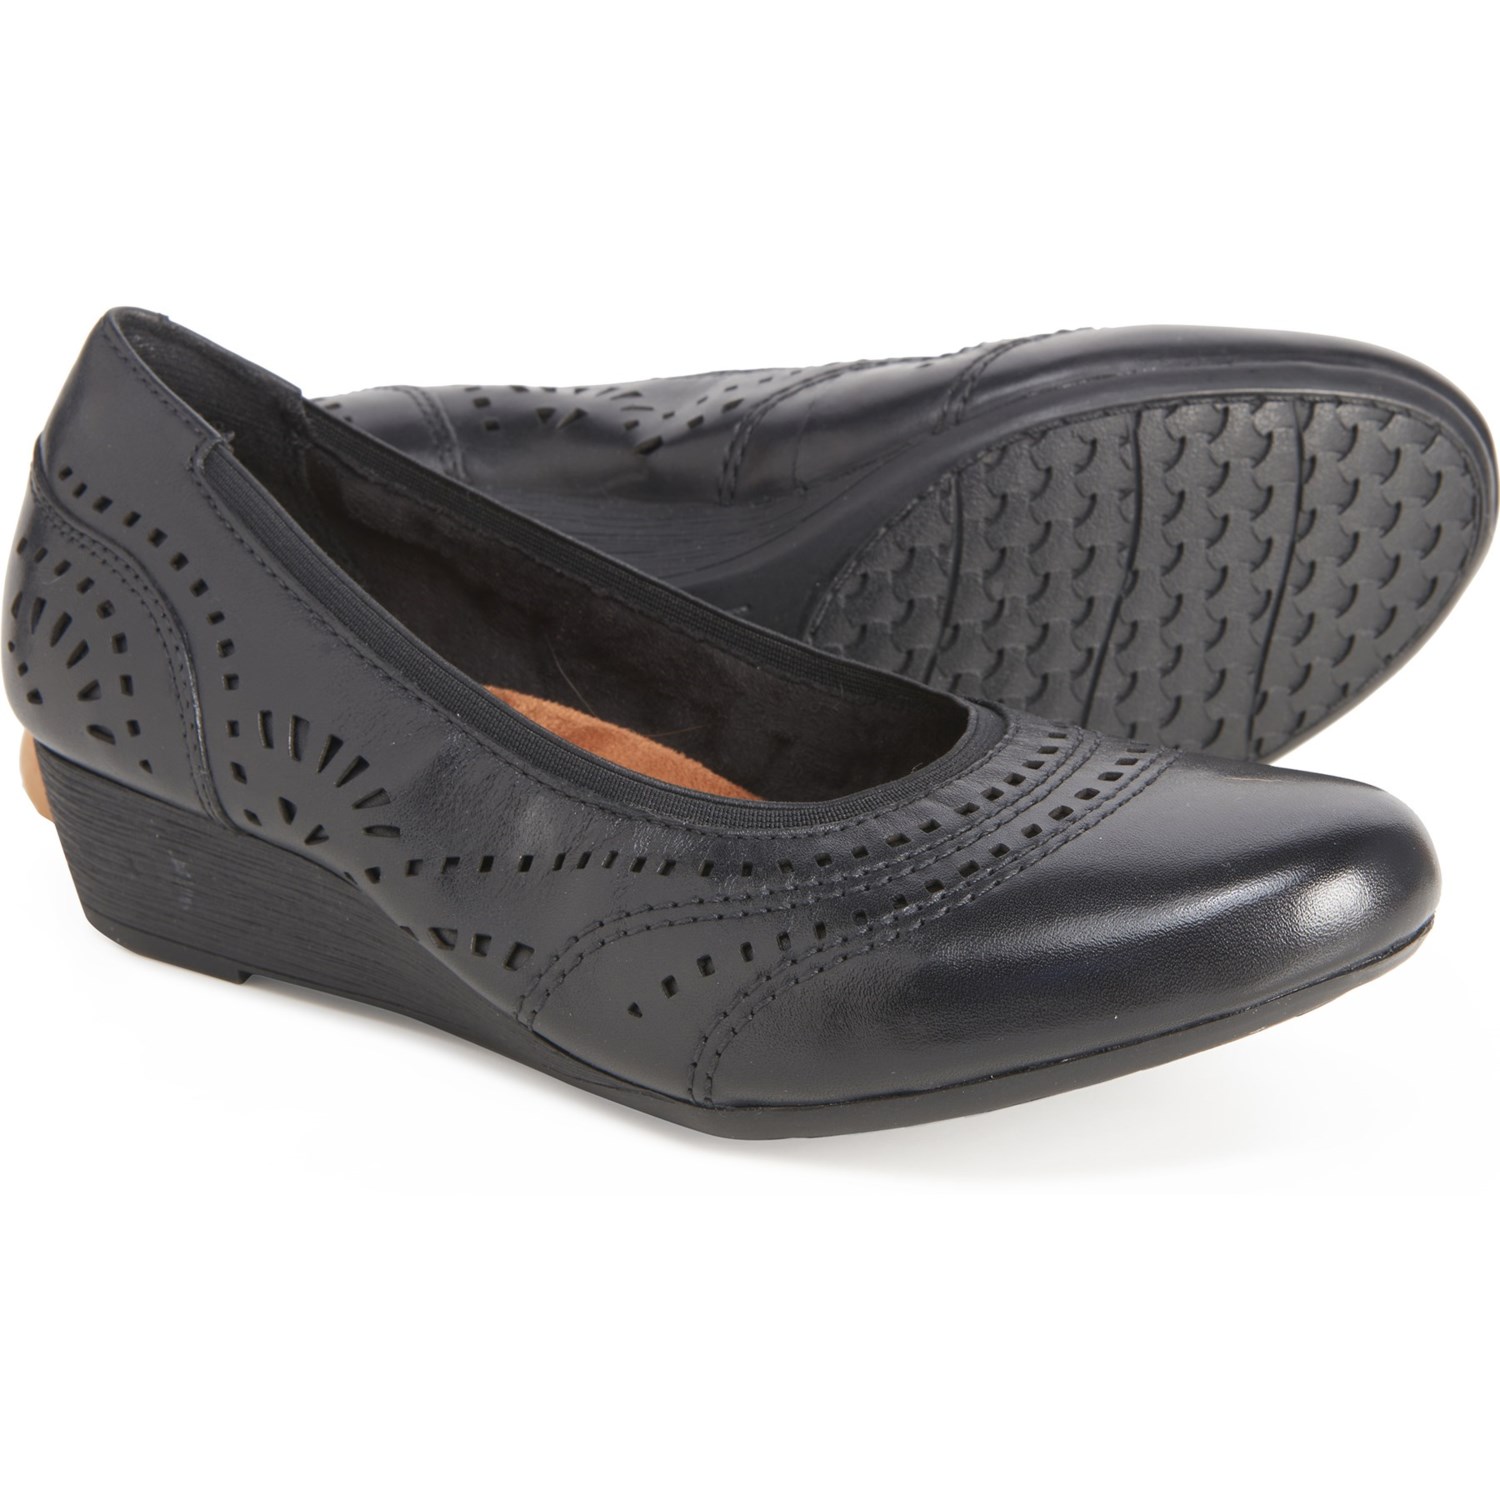 rockport womens shoes cobb hill